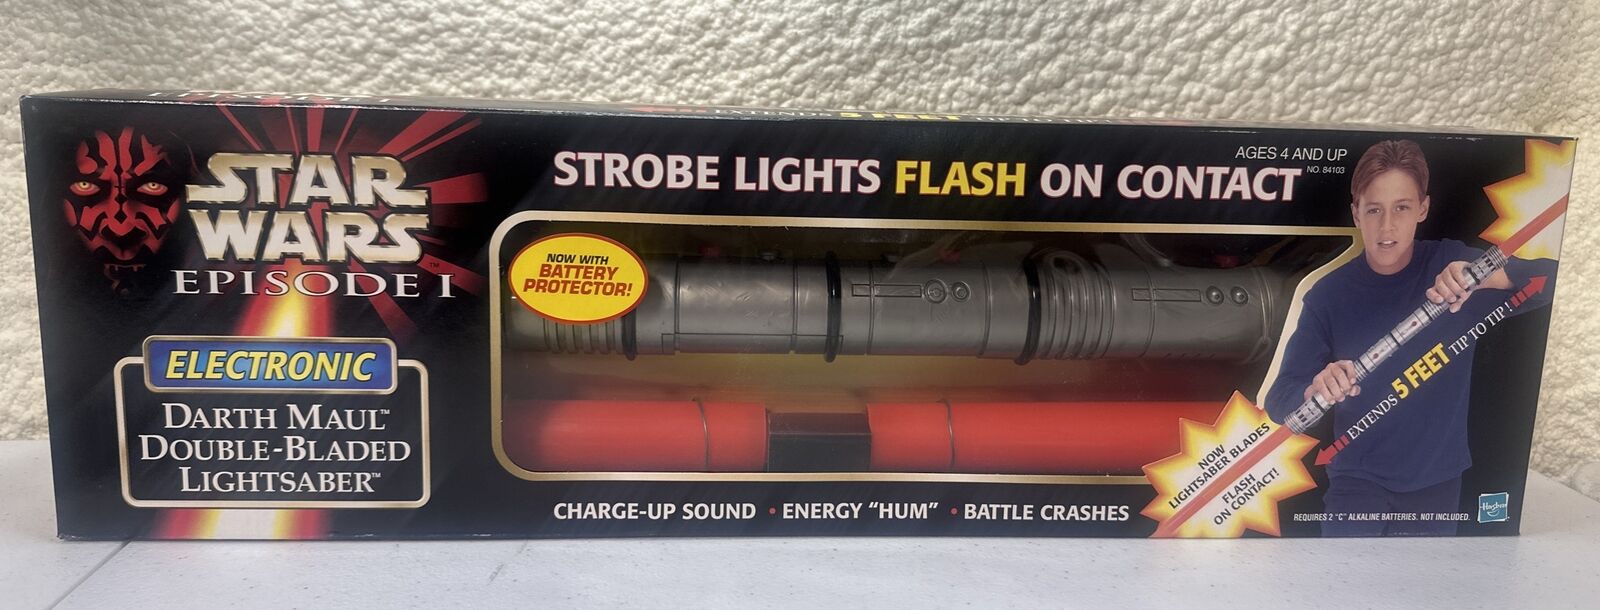 New Star Wars Episode 1 Hasbro Darth Maul Double-Bladed Electronic Lightsaber